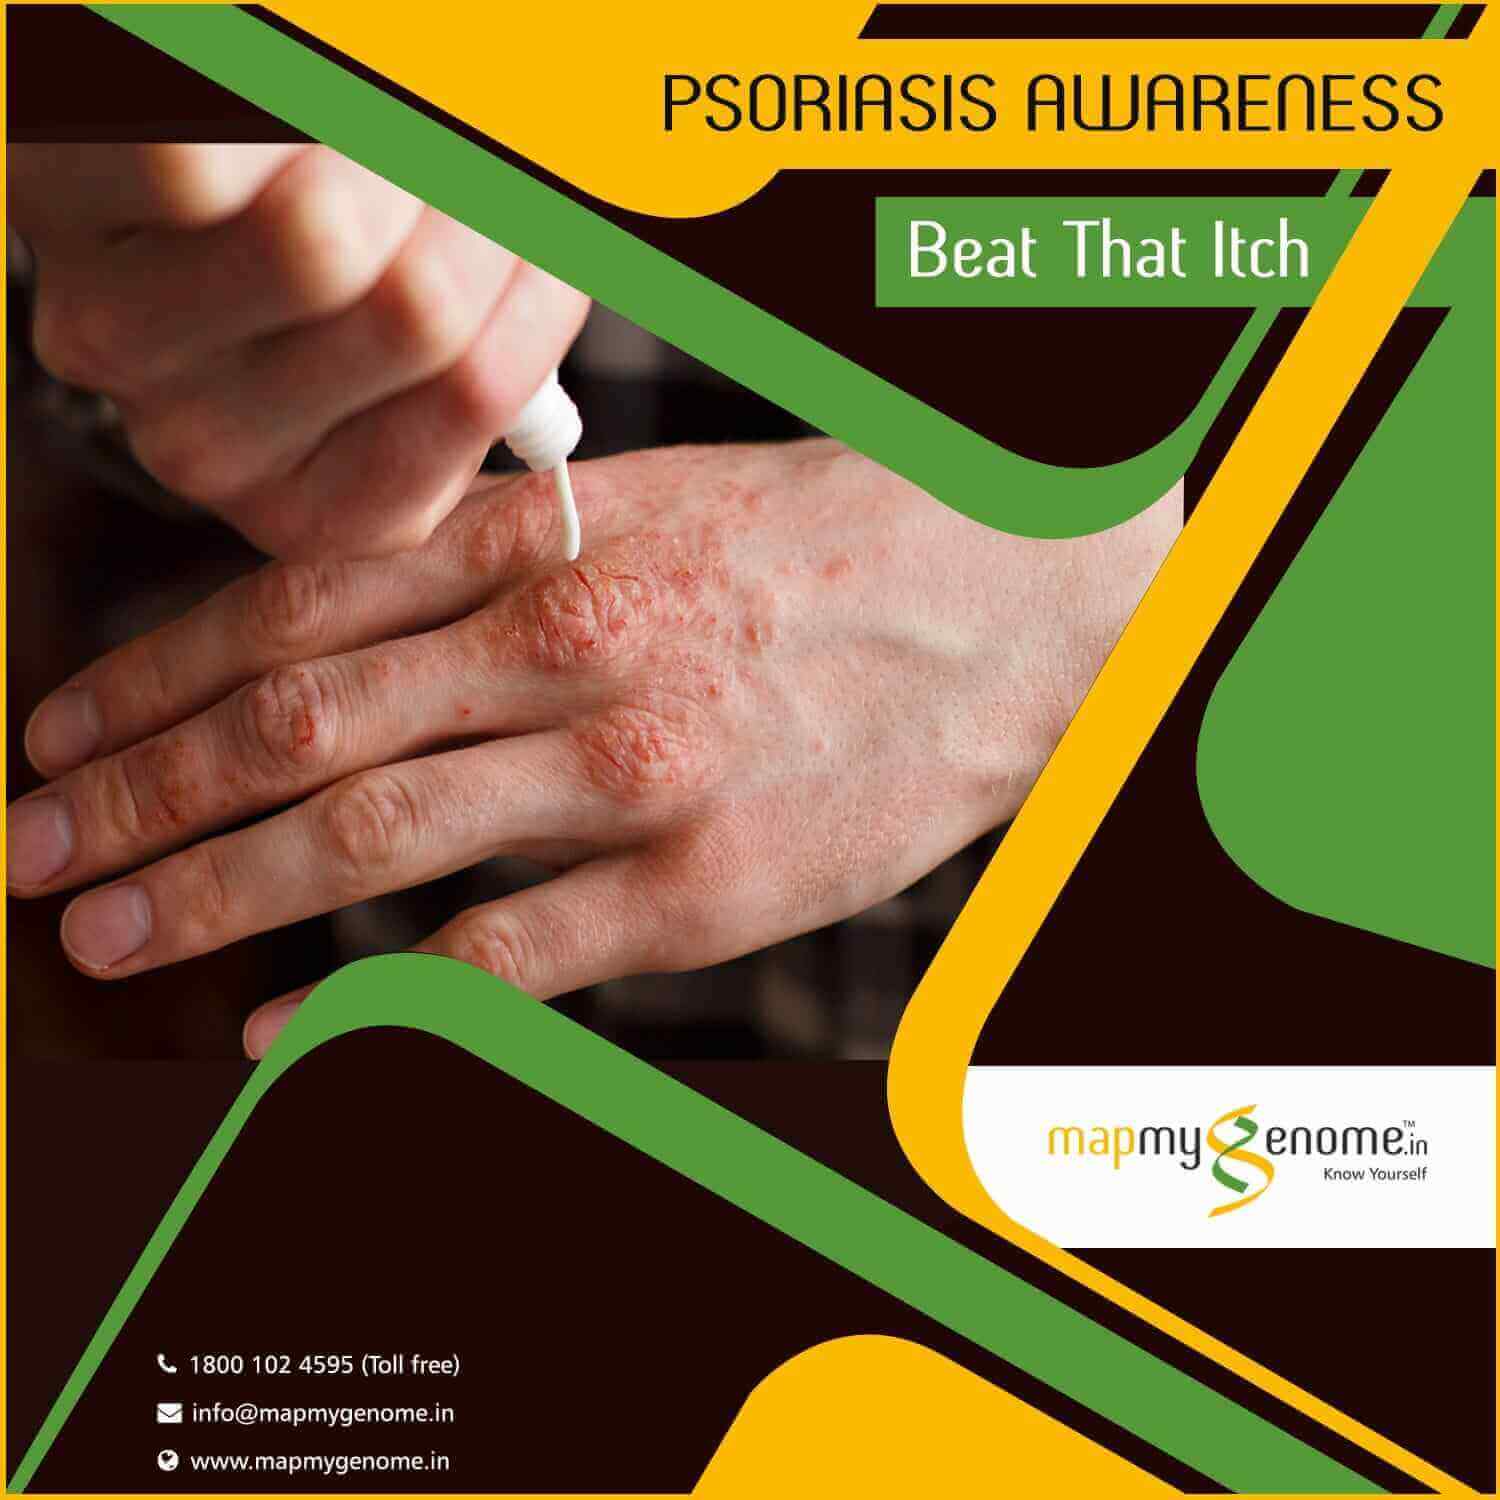 Psoriasis Awareness: Stress-busters every day, keep the itch away!